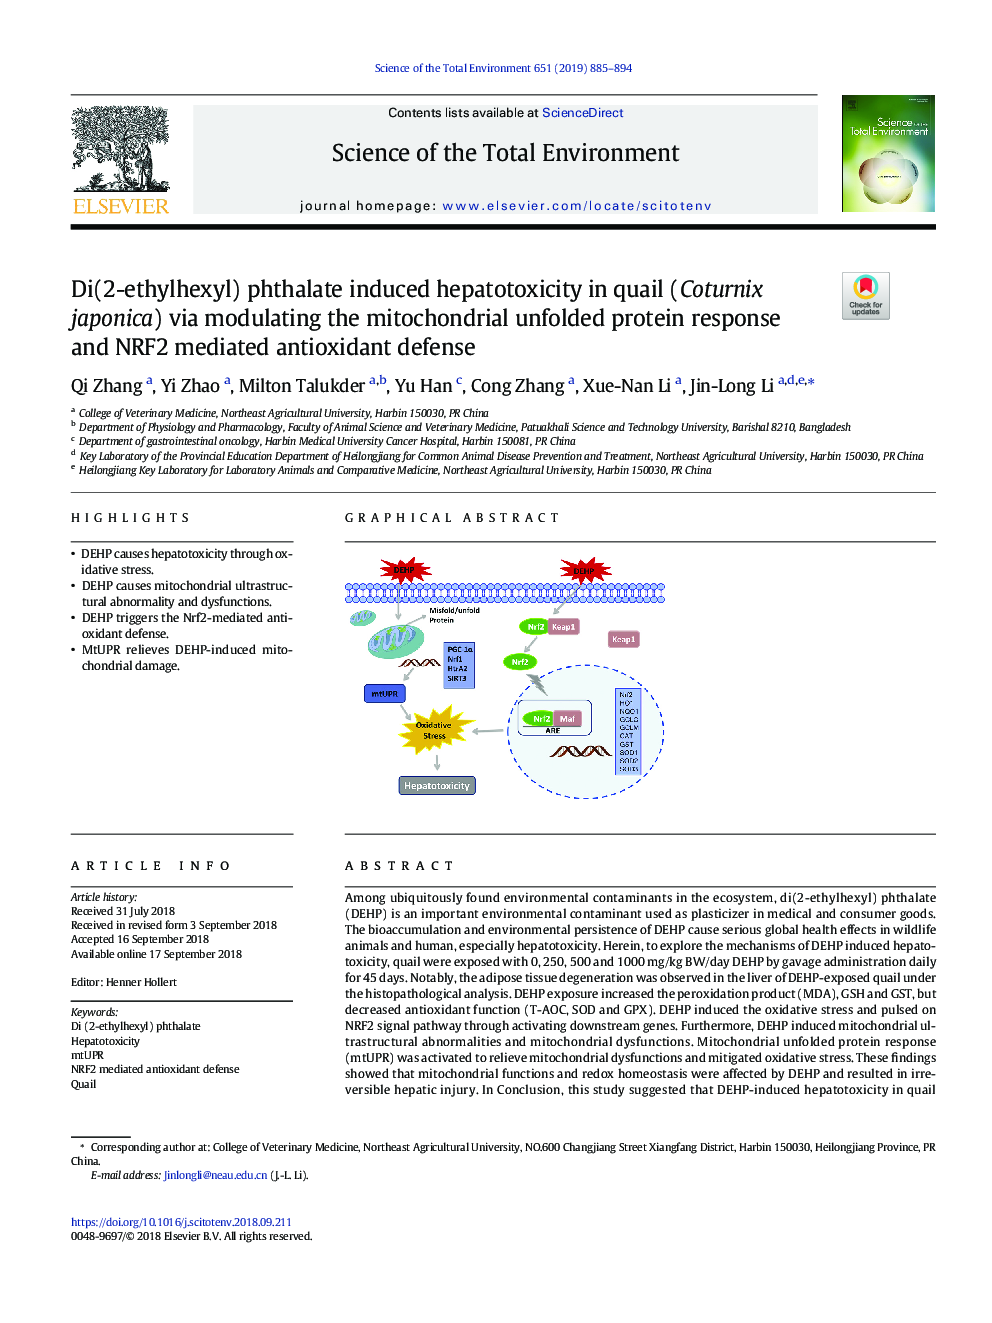 Di(2-ethylhexyl) phthalate induced hepatotoxicity in quail (Coturnix japonica) via modulating the mitochondrial unfolded protein response and NRF2 mediated antioxidant defense